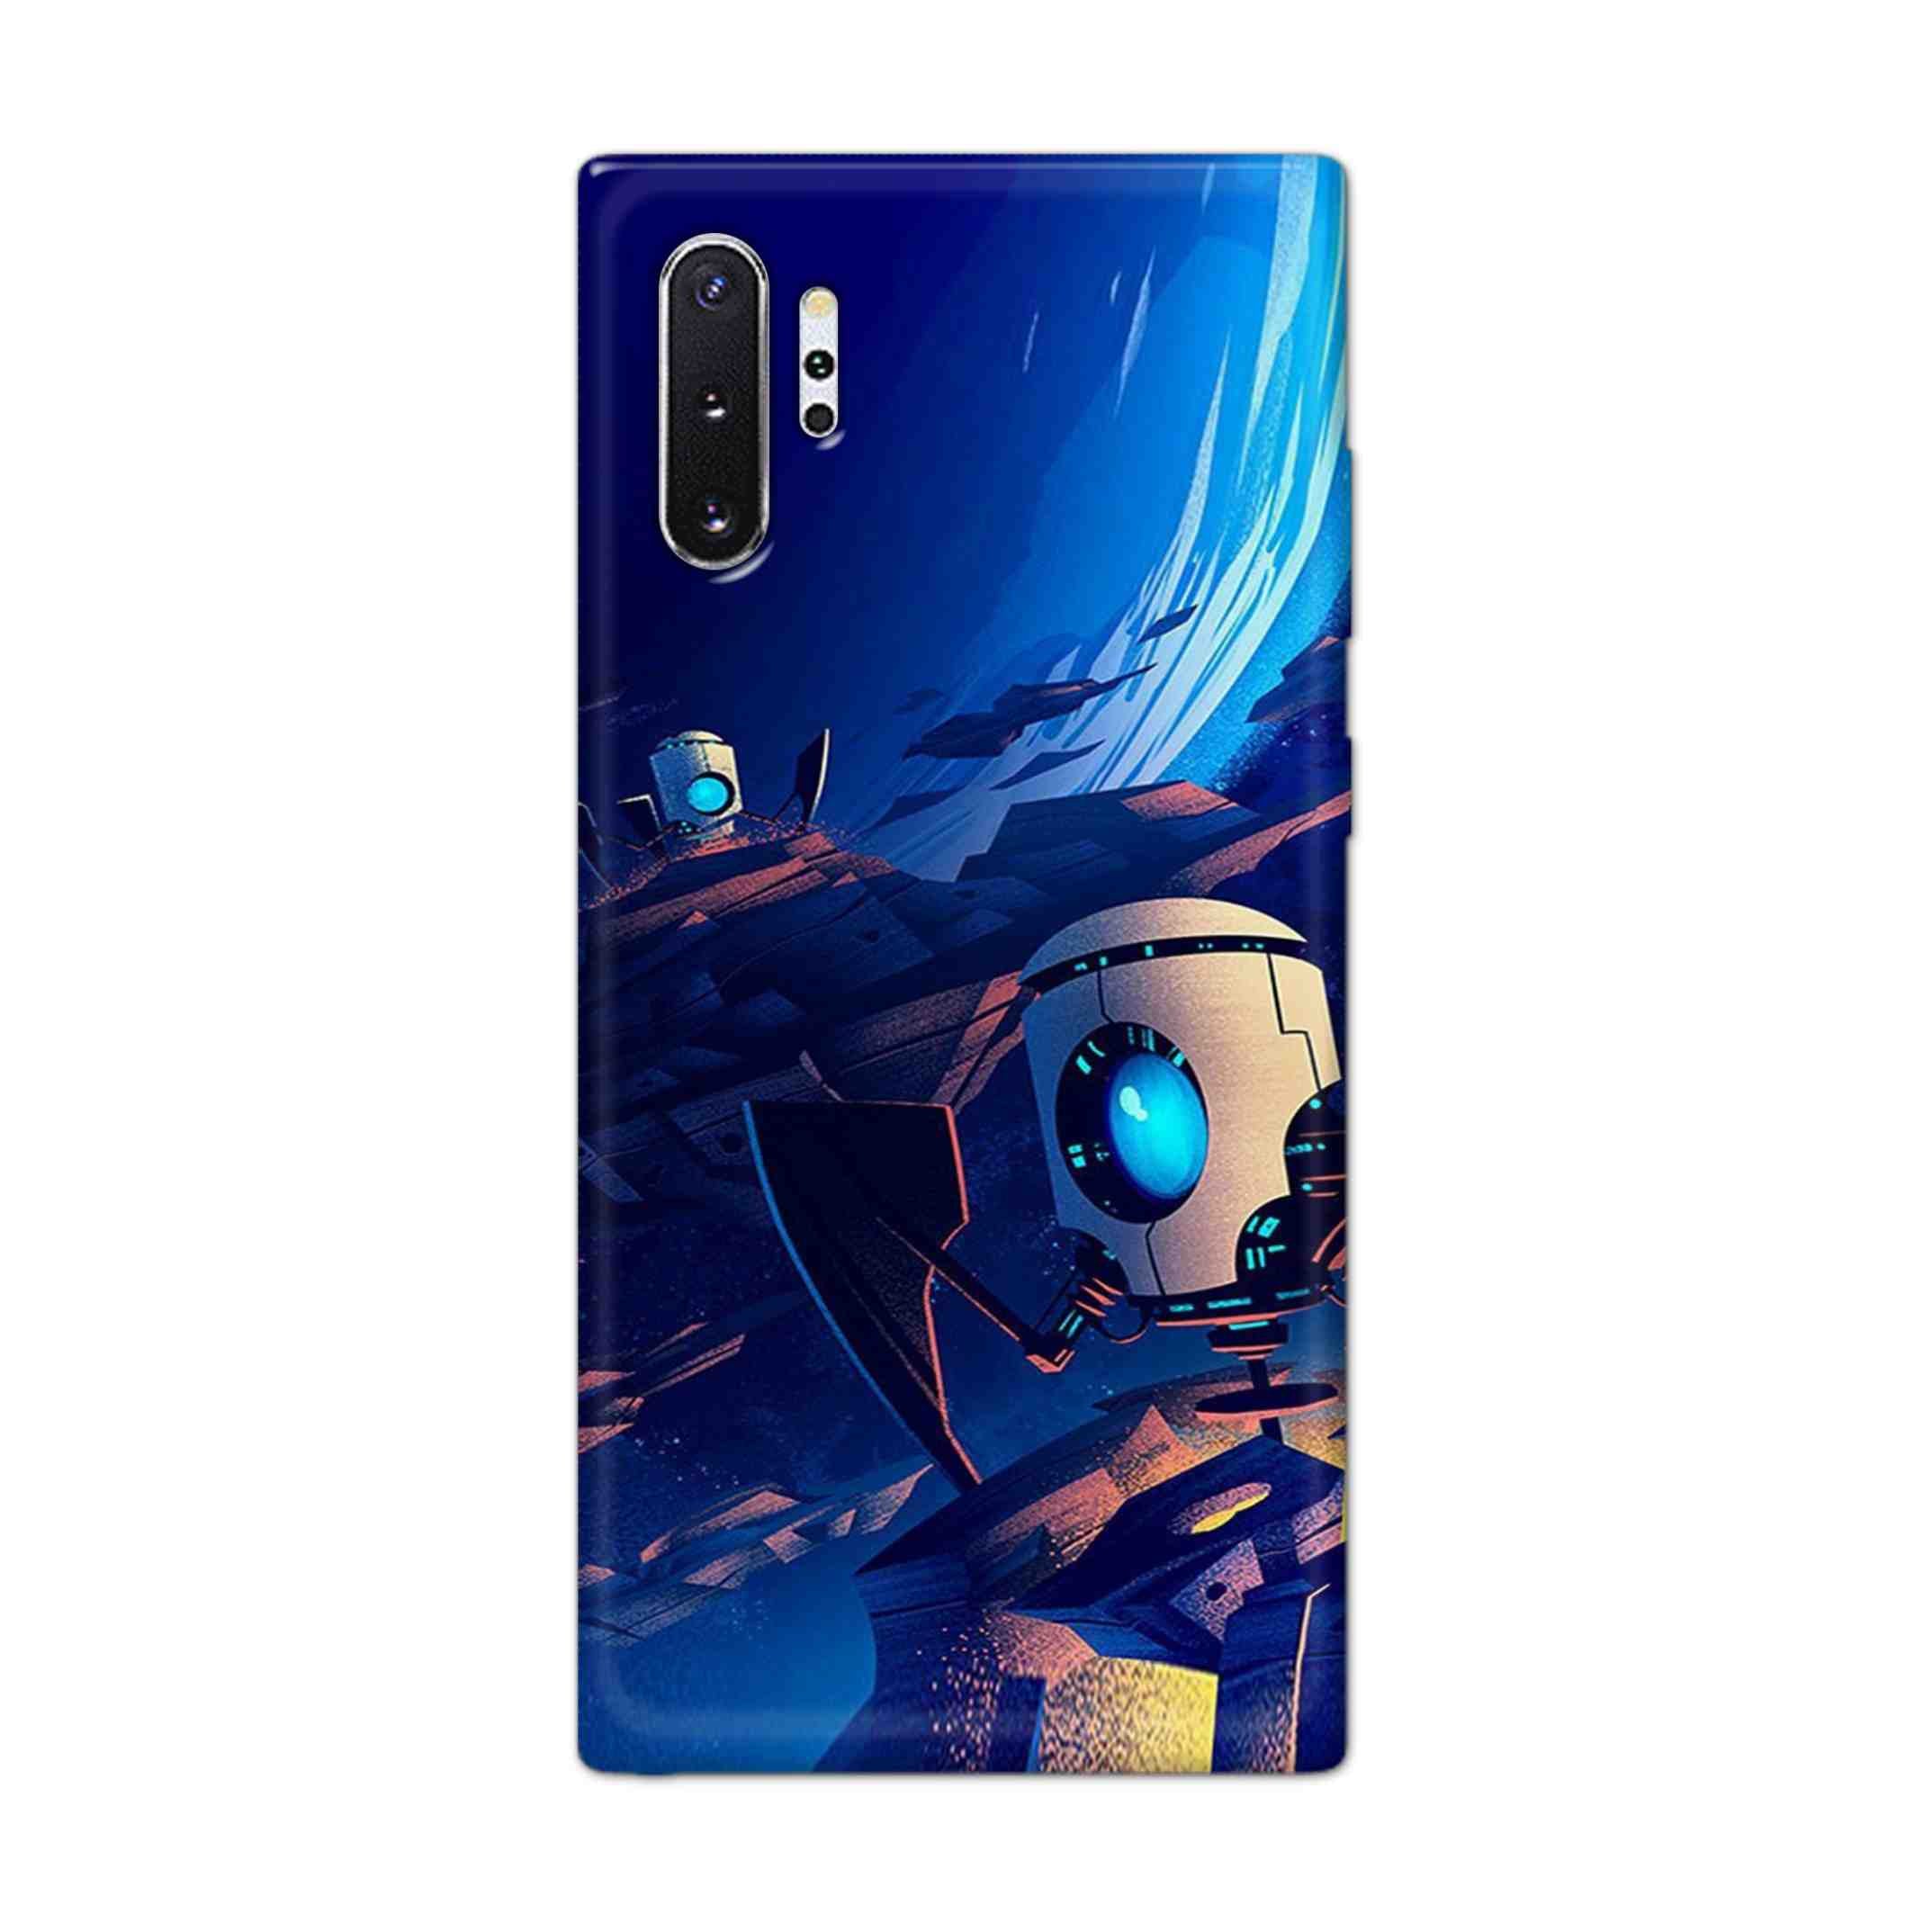 Buy Spaceship Robot Hard Back Mobile Phone Case Cover For Samsung Note 10 Plus (5G) Online